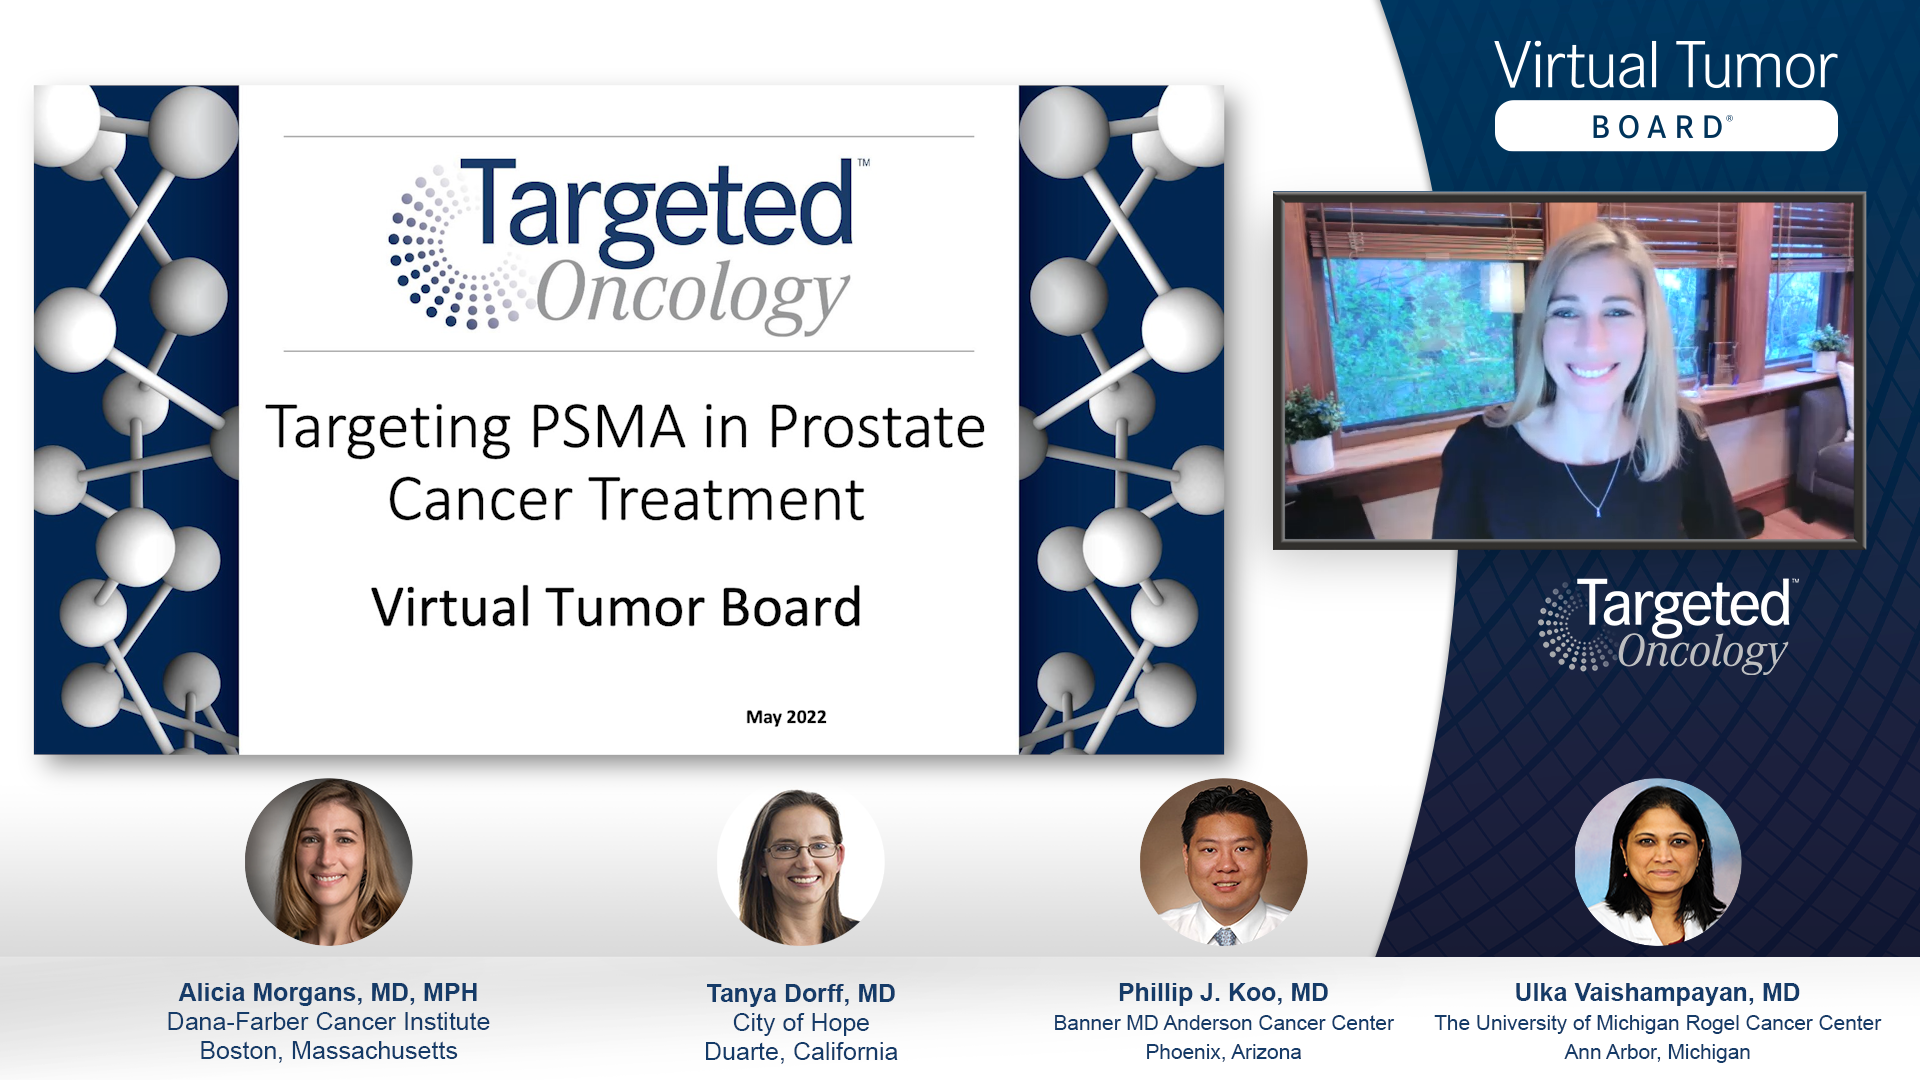 Therapy Sequencing and Patient Selection in Prostate Cancer Treatment